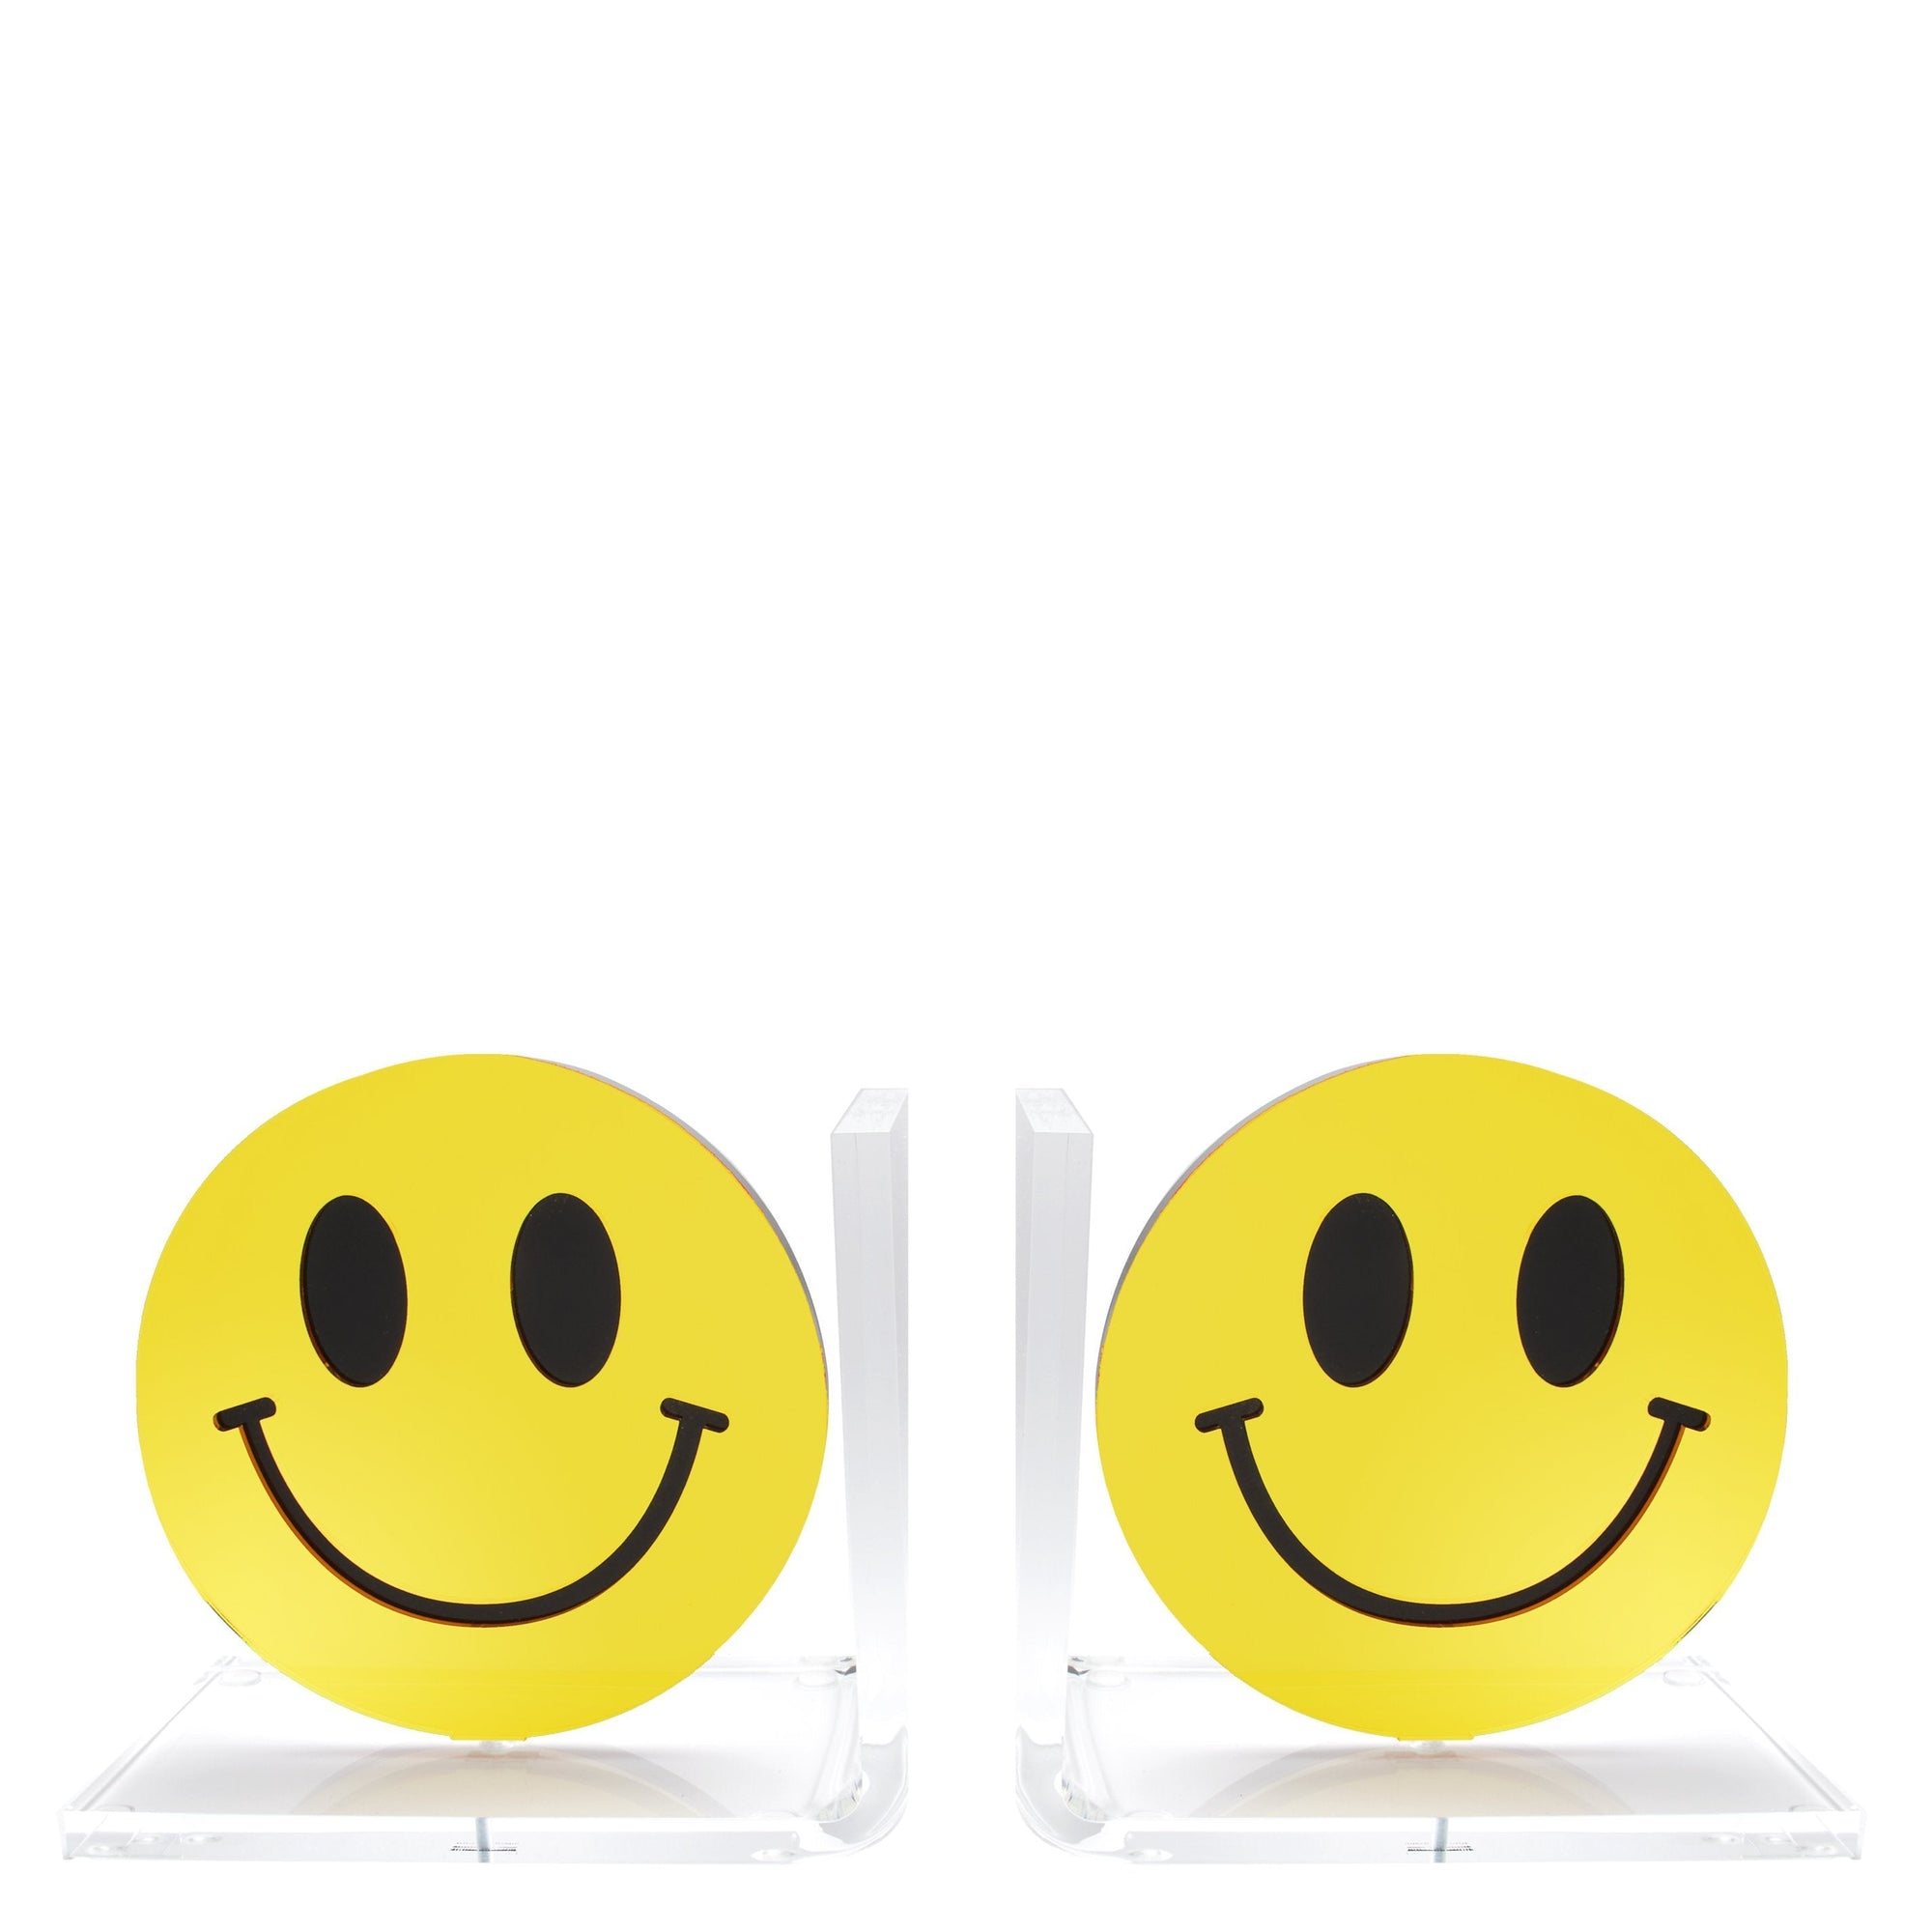 Bookends Mirrored Yellow SMILEY FACE 7.5 inches height 